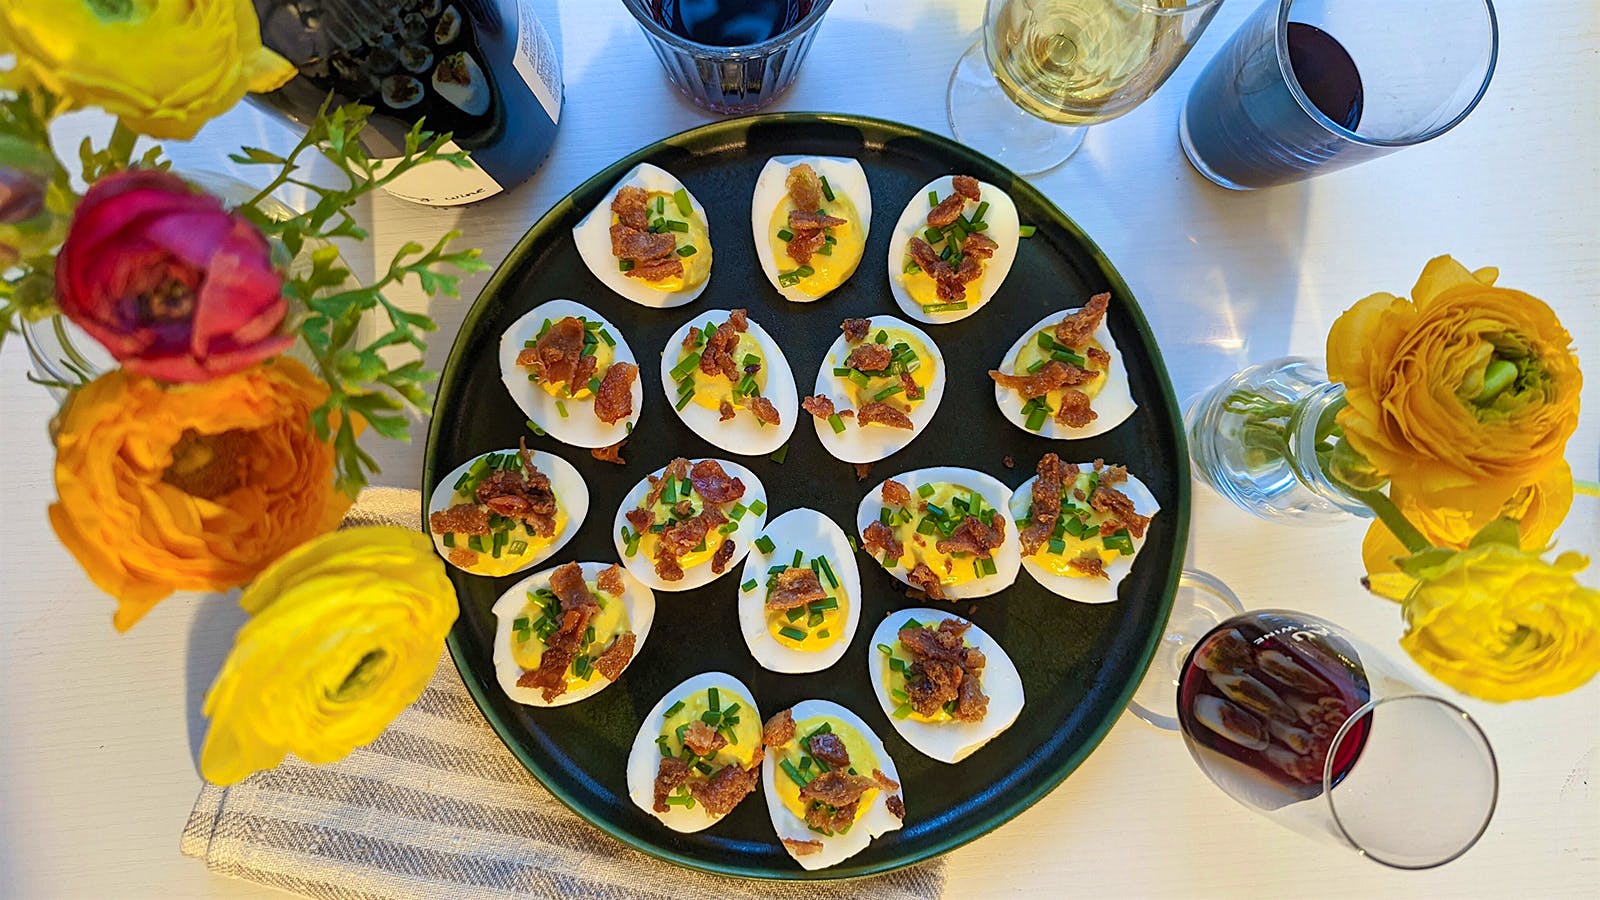 Horseradish Deviled Eggs with Chives and Gribenes from Zach Engel of Galit